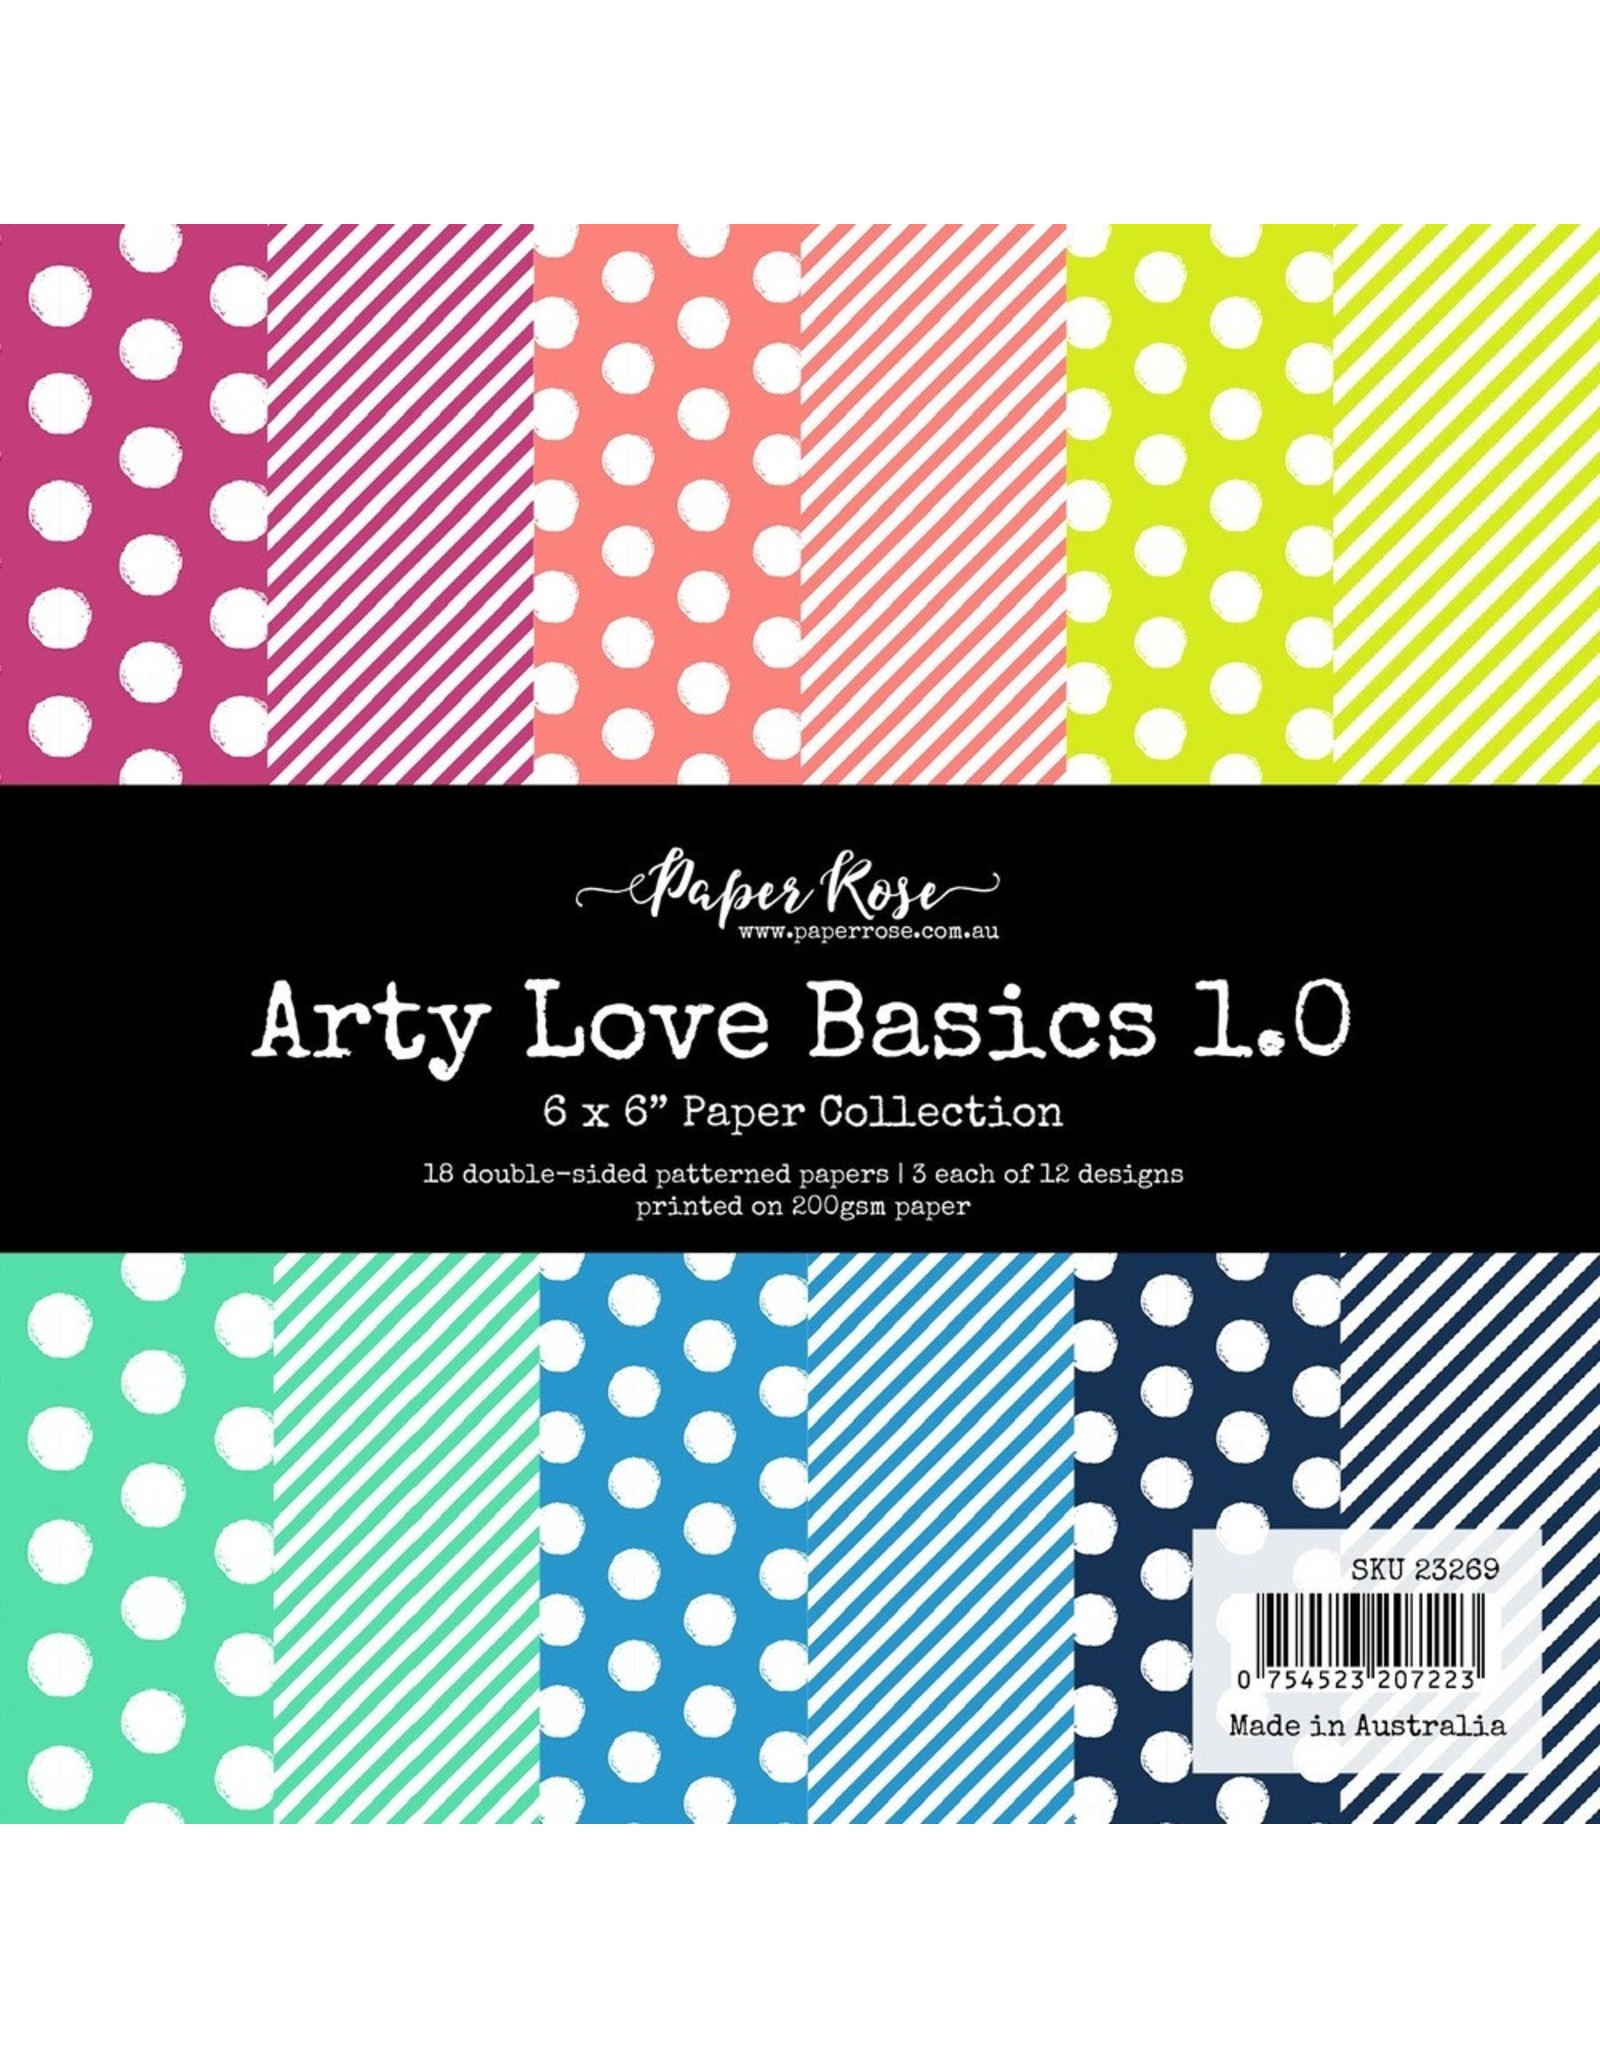 PAPER ROSE PAPER ROSE ARTY LOVE BASICS 1.0 PAPER COLLECTION 6x6 18 SHEETS